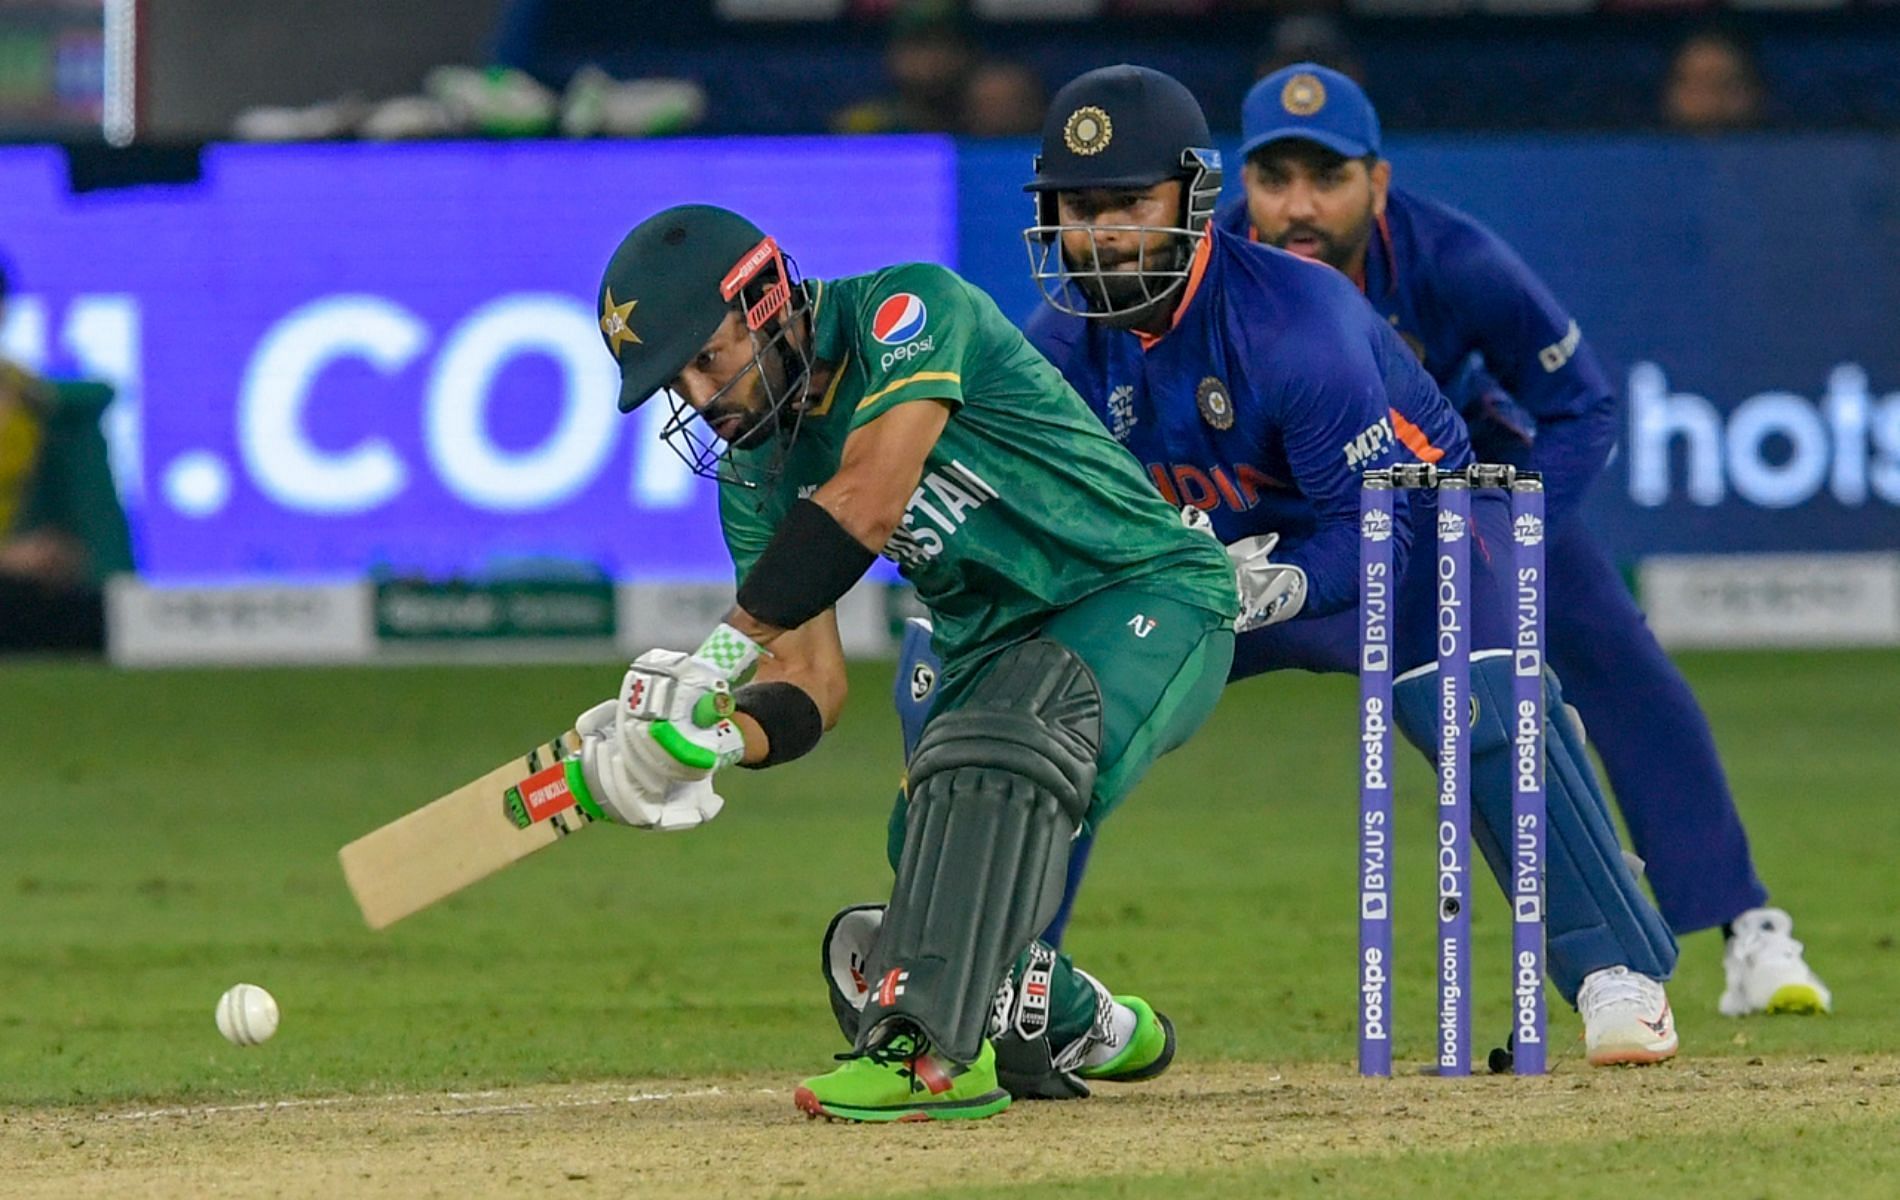 T20 World Cup 2021 Points Table: Updated standings after India vs Pakistan match